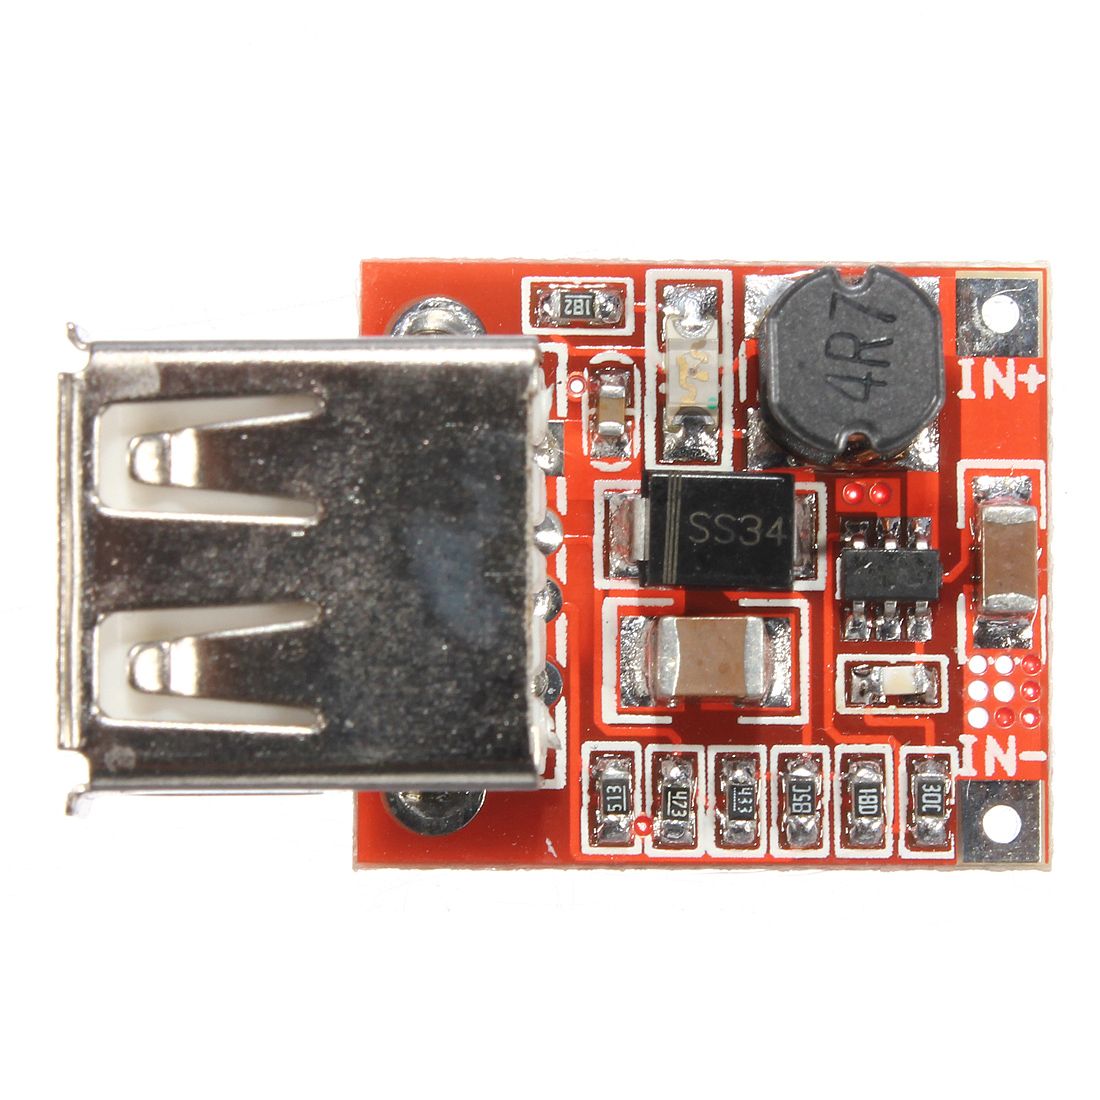 3Pcs-3V-To-5V-1A-USB-Charger-DC-DC-Converter-Step-Up-Boost-Module-For-Phone-MP3-MP4-946013